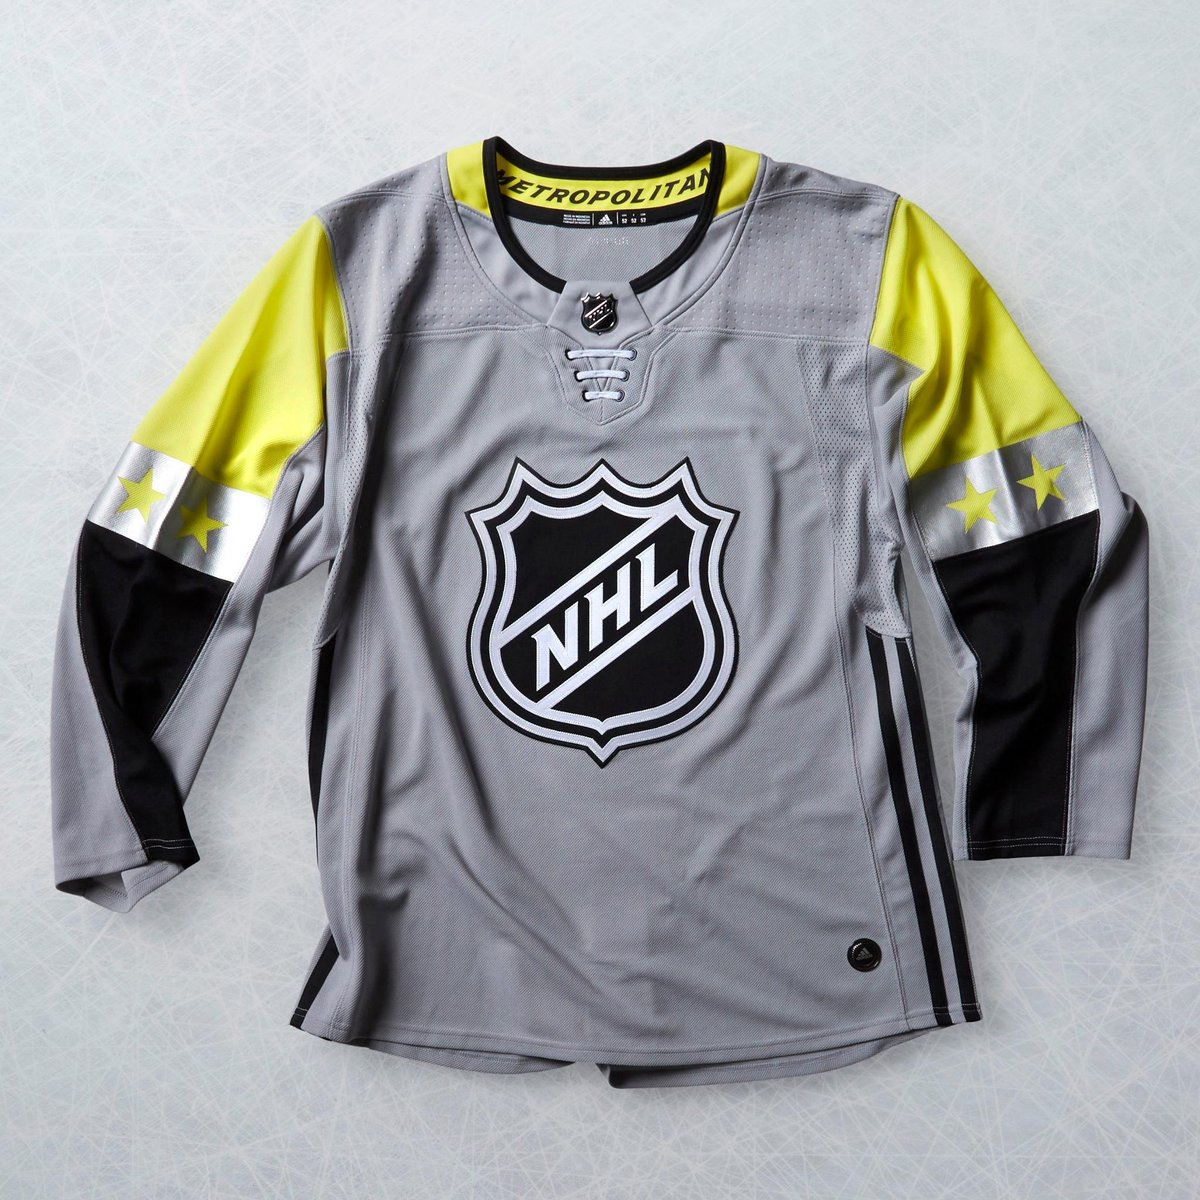 NHL unveils slick jerseys for this year's All-Star Game - Article - Bardown